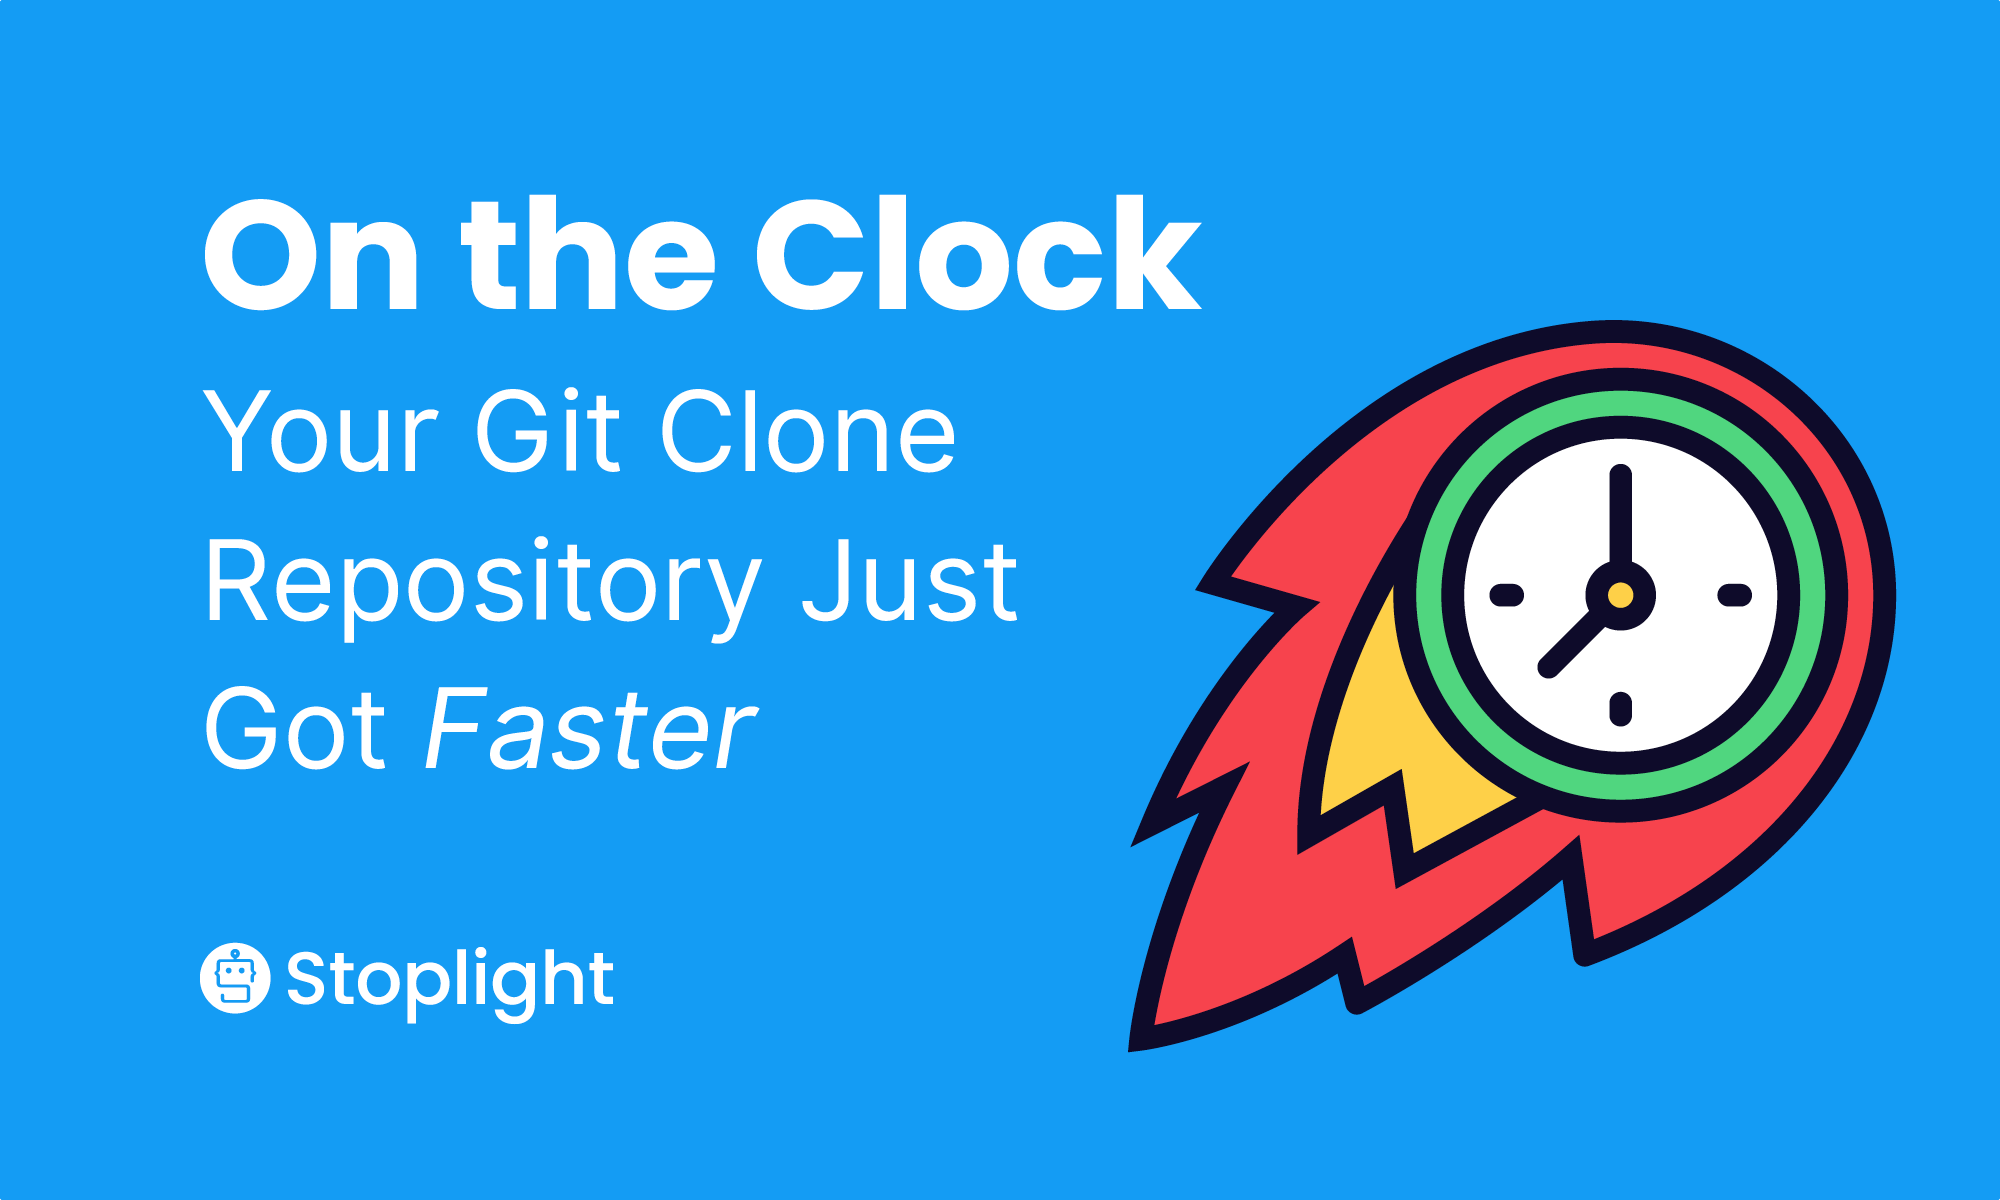 On the Clock: Your Git Clone Repository Just Got Faster